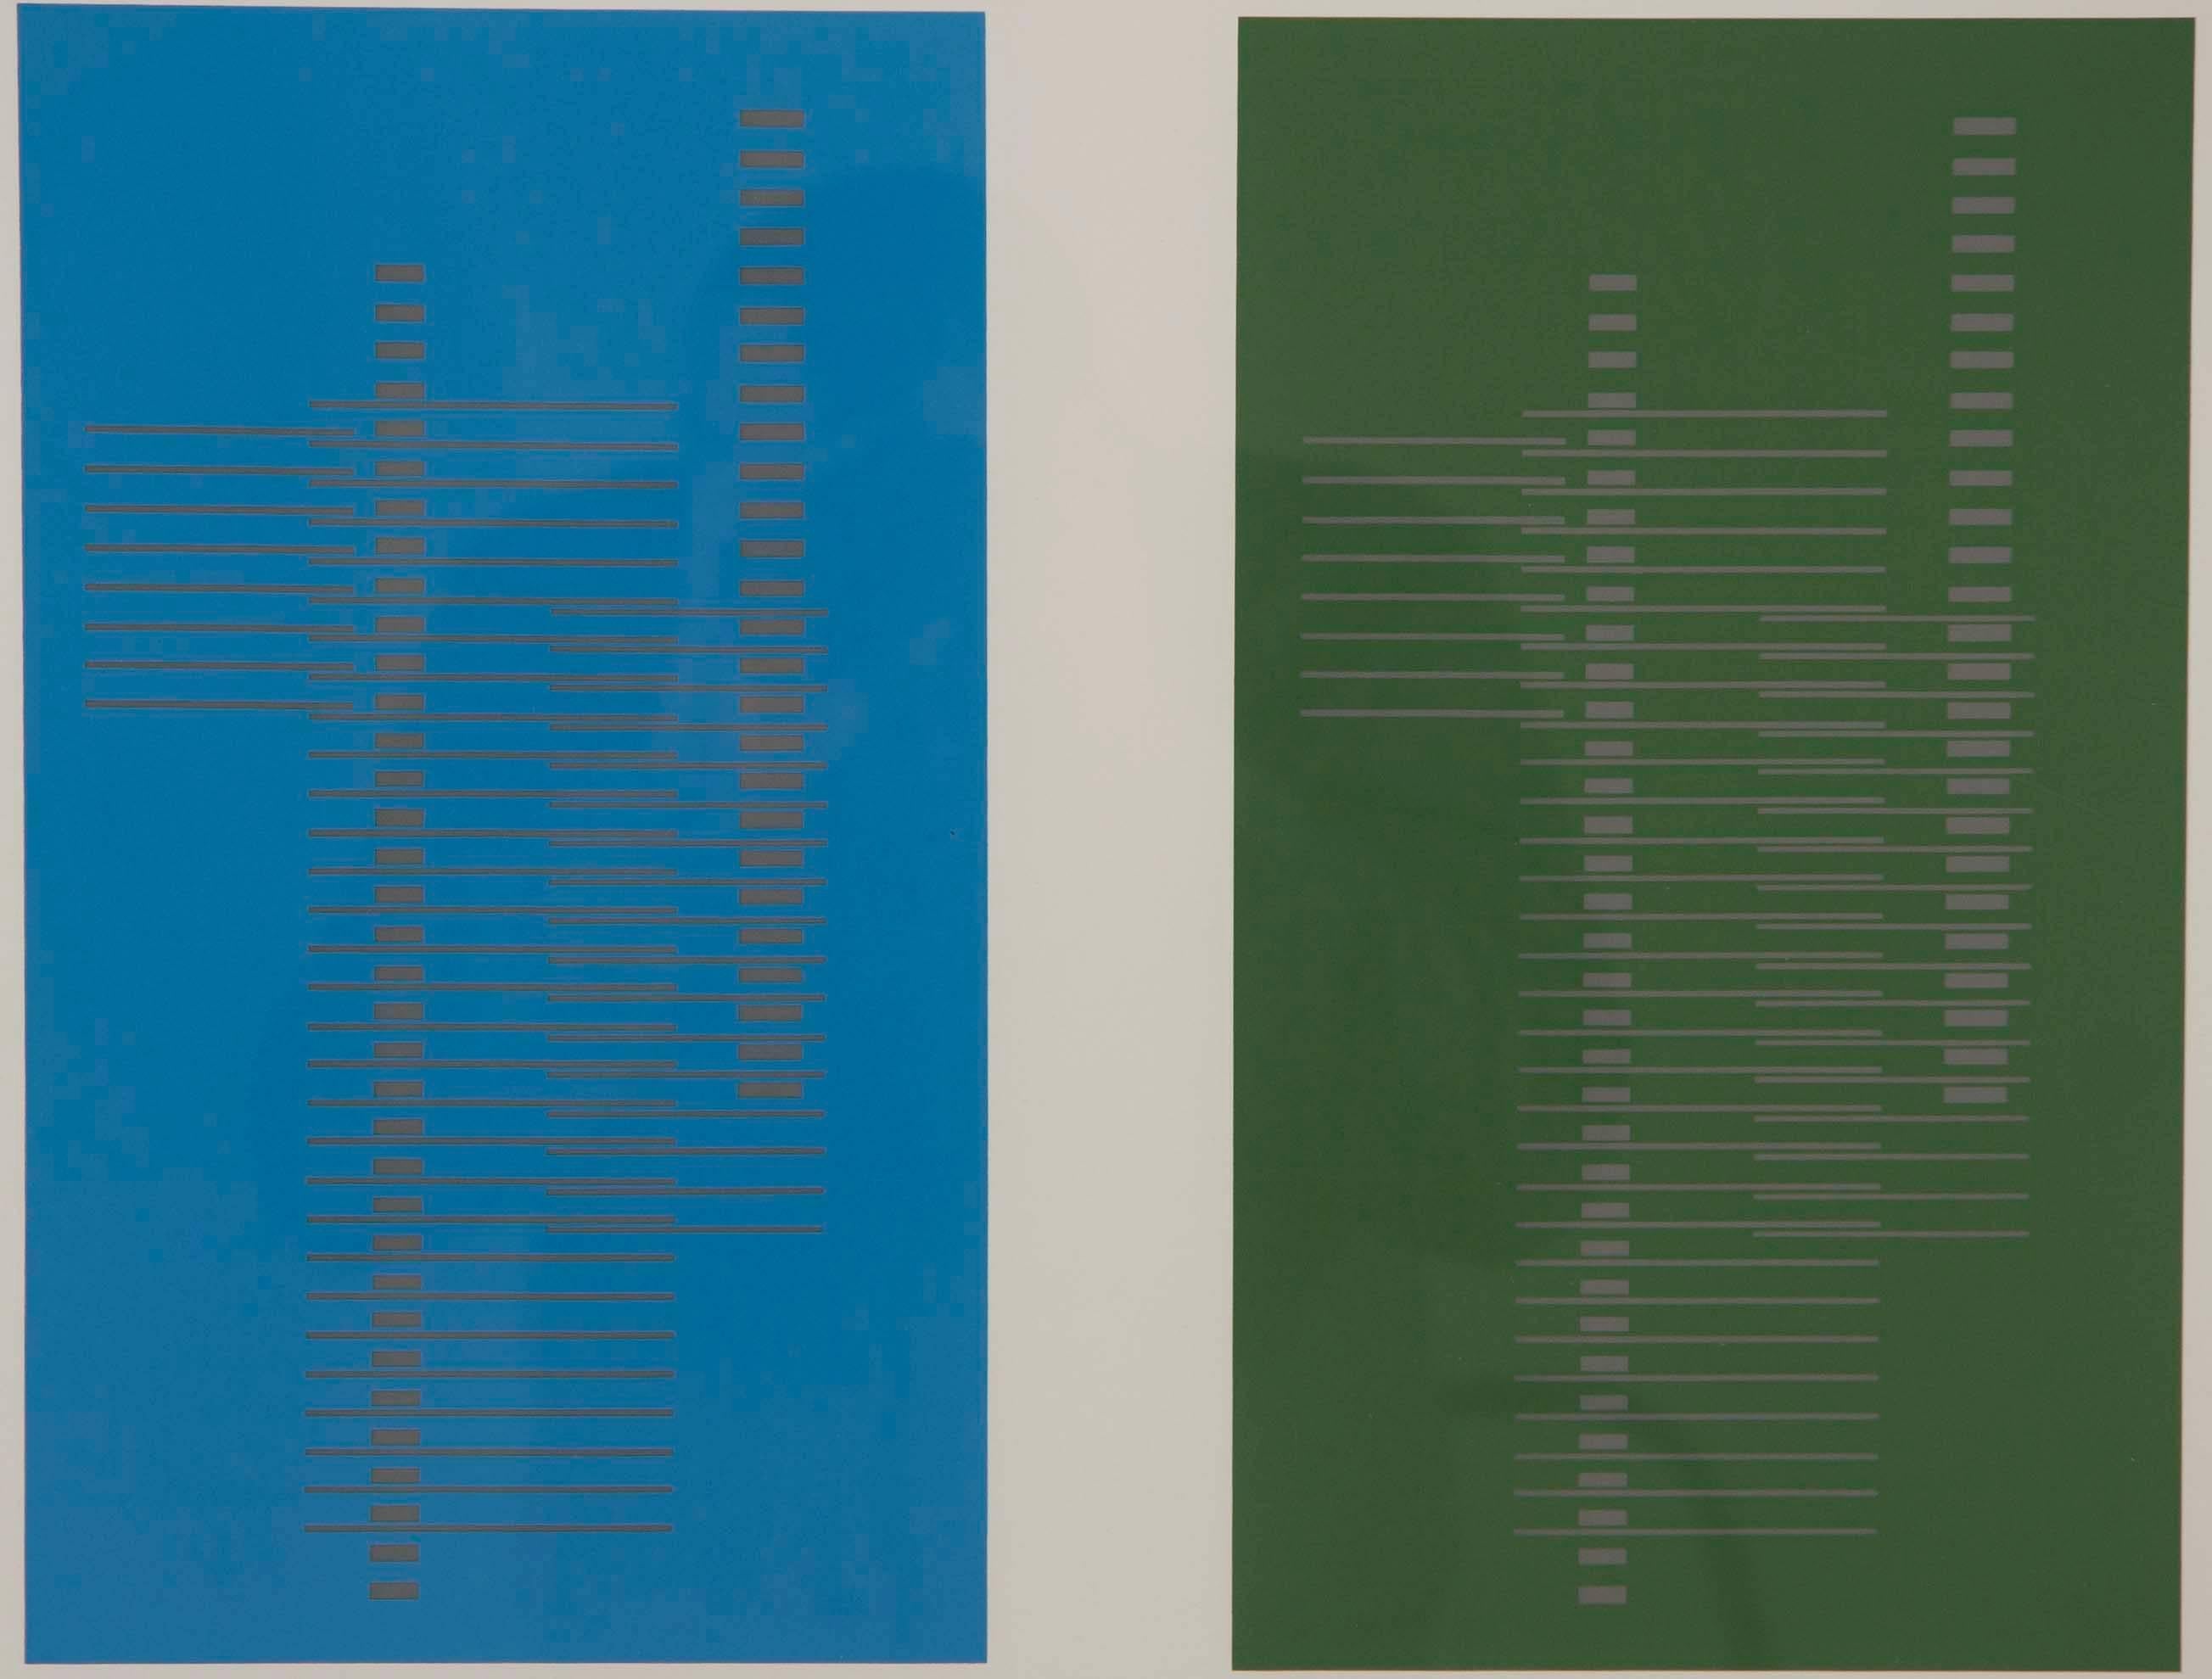 Josef Albers from Formulation: Articulation, 1972. Silkscreen prints, folio 1/folder 6. Floated in while gold leaf frames using all acid free archival materials. From an edition of 1000. Printed by Sirocco screen printing, New Haven. Published by